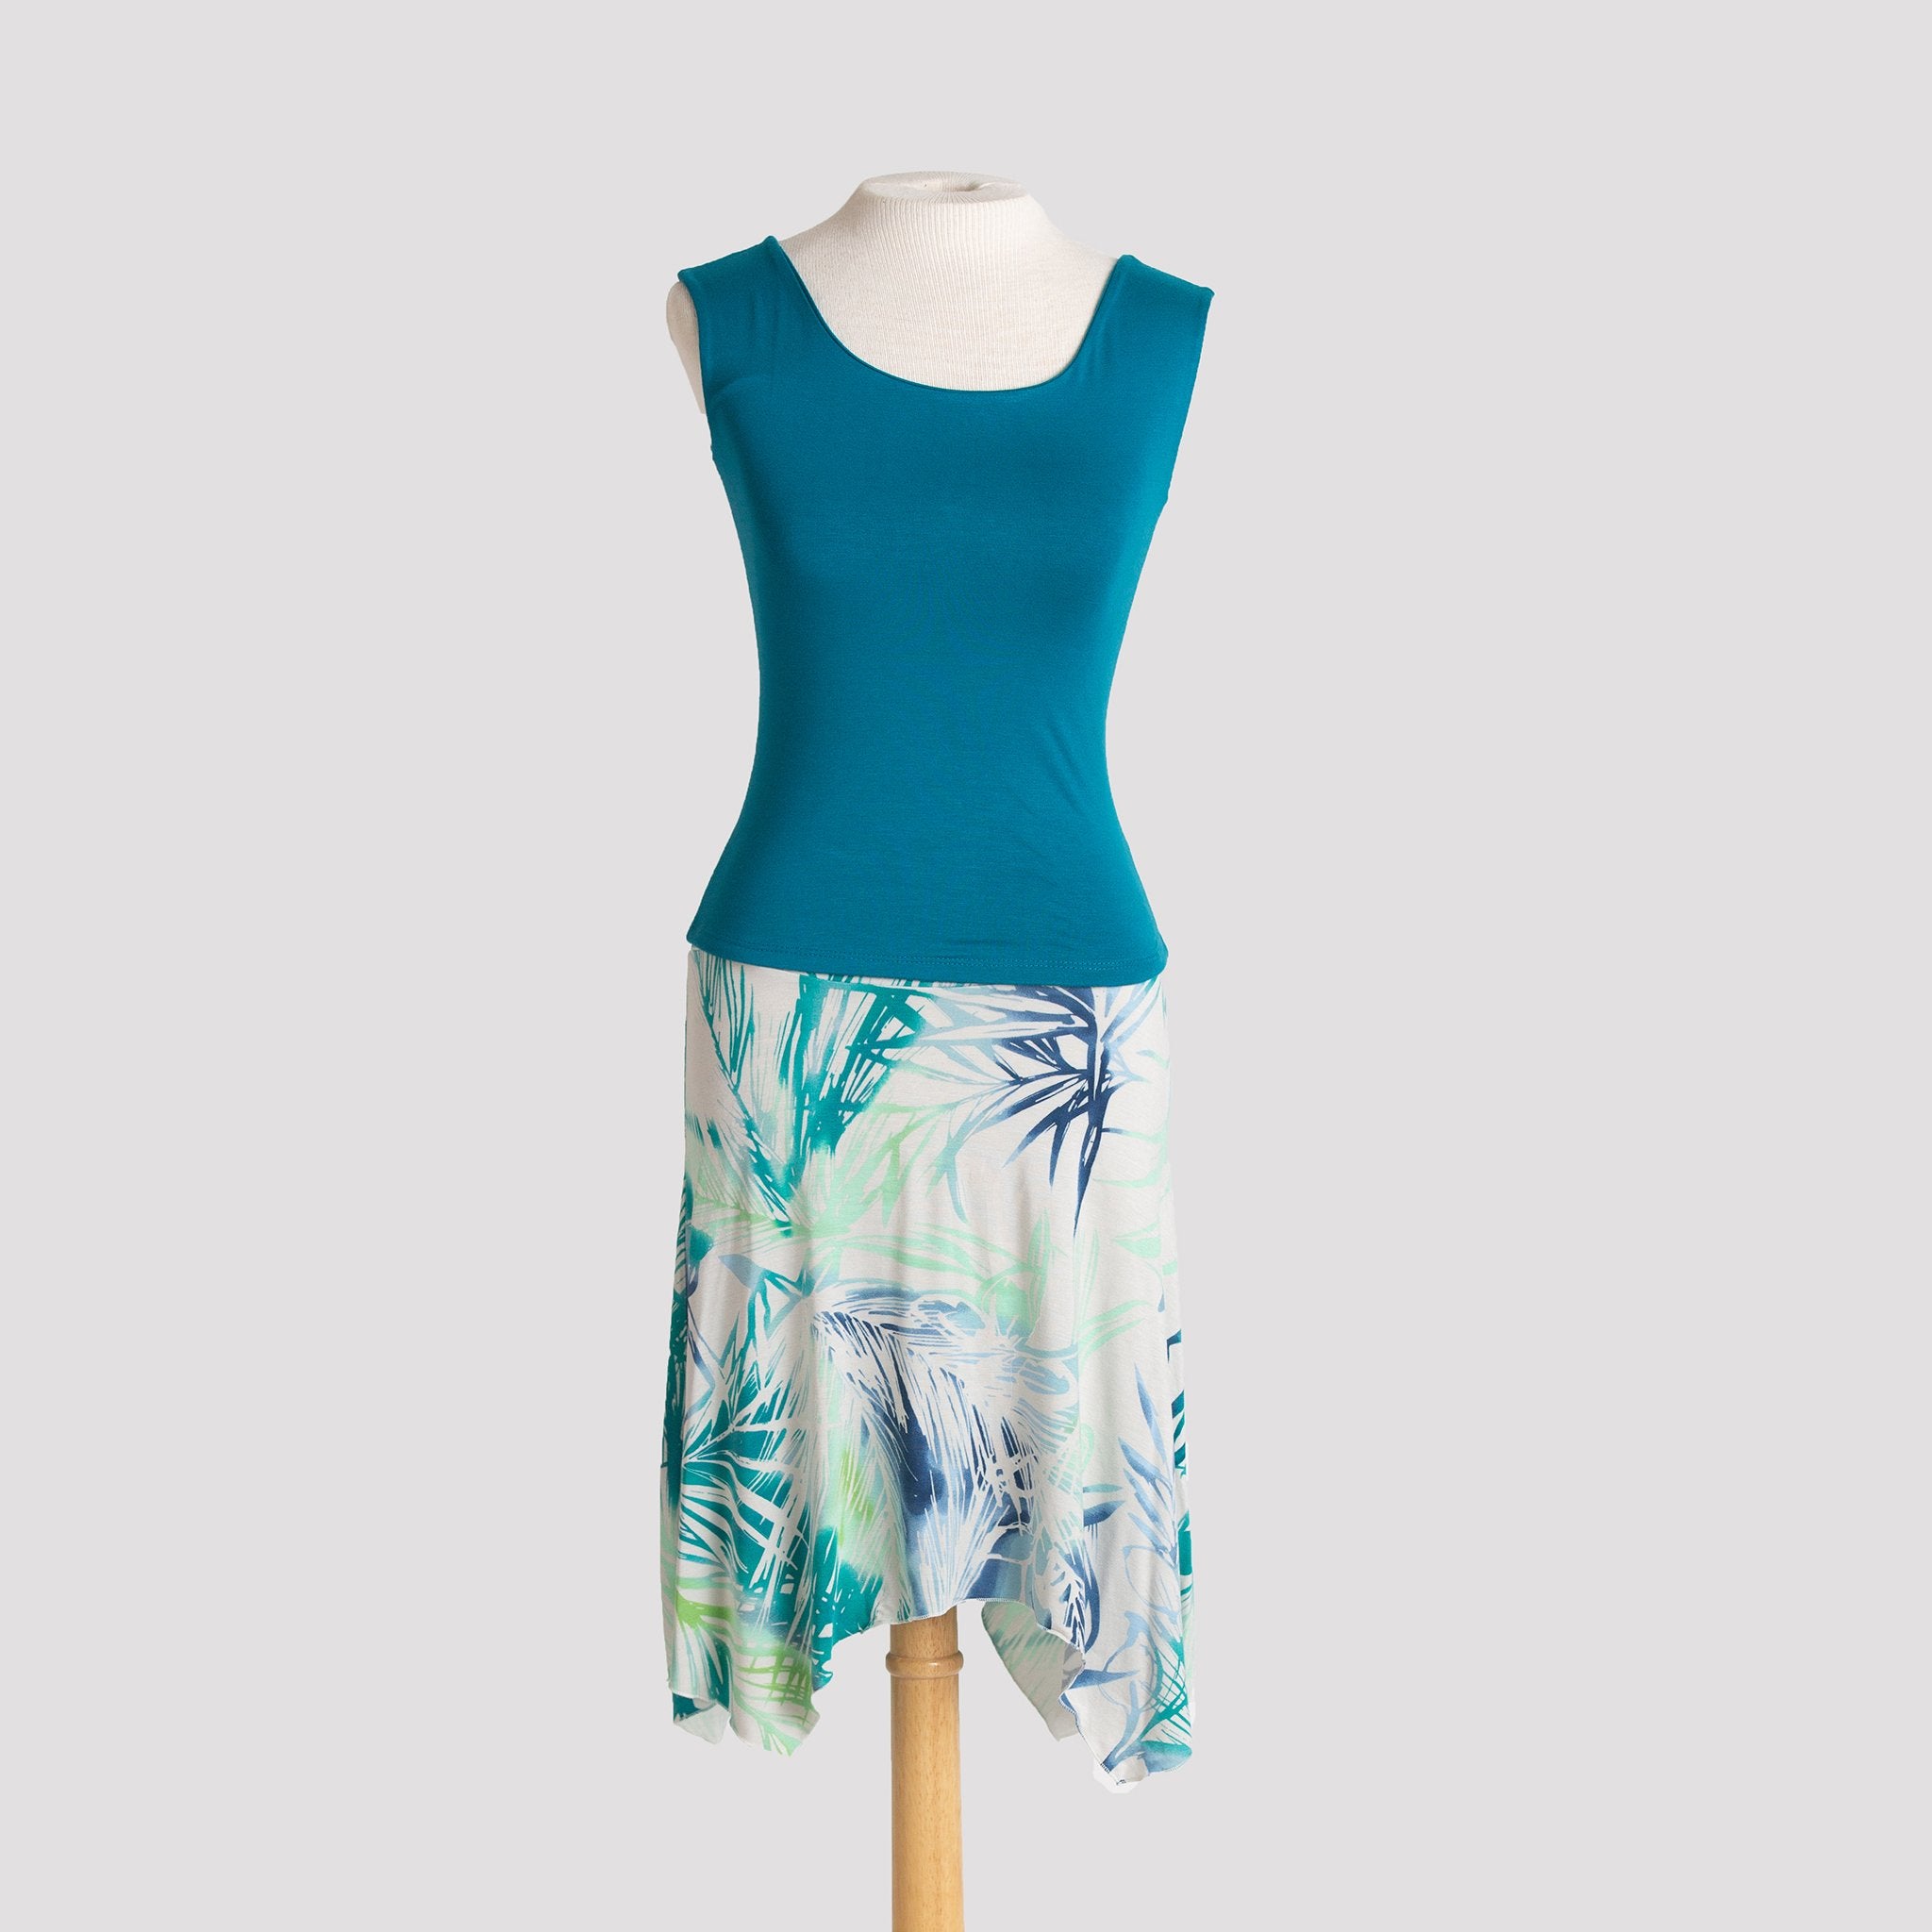 Shell Top in Green Teal, shown with Short Handkerchief Skirt